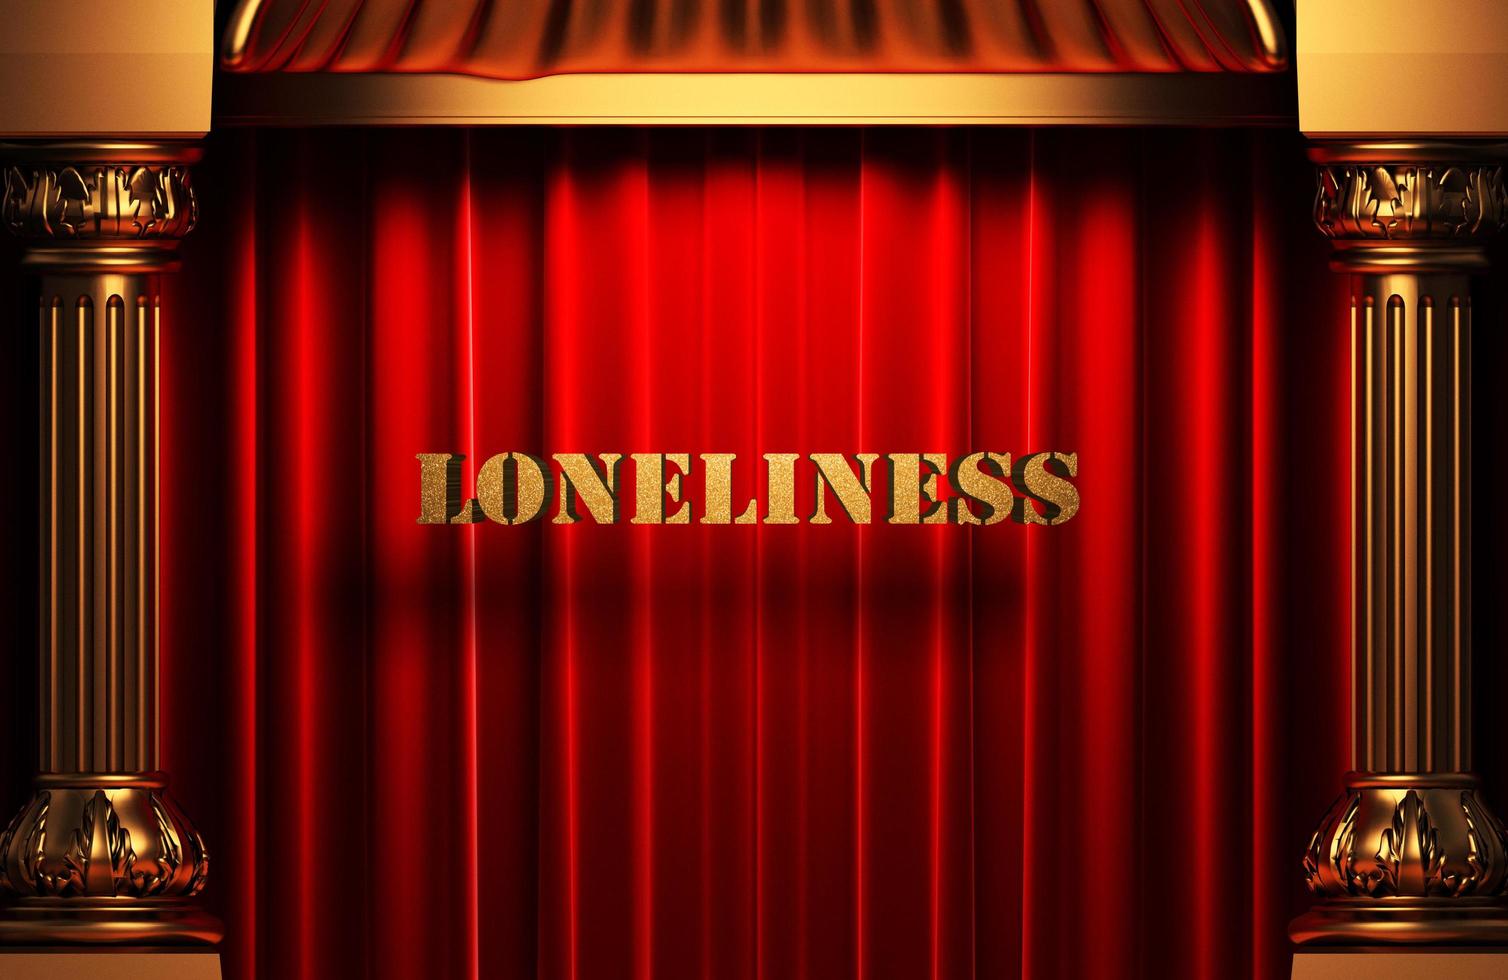 loneliness golden word on red curtain photo